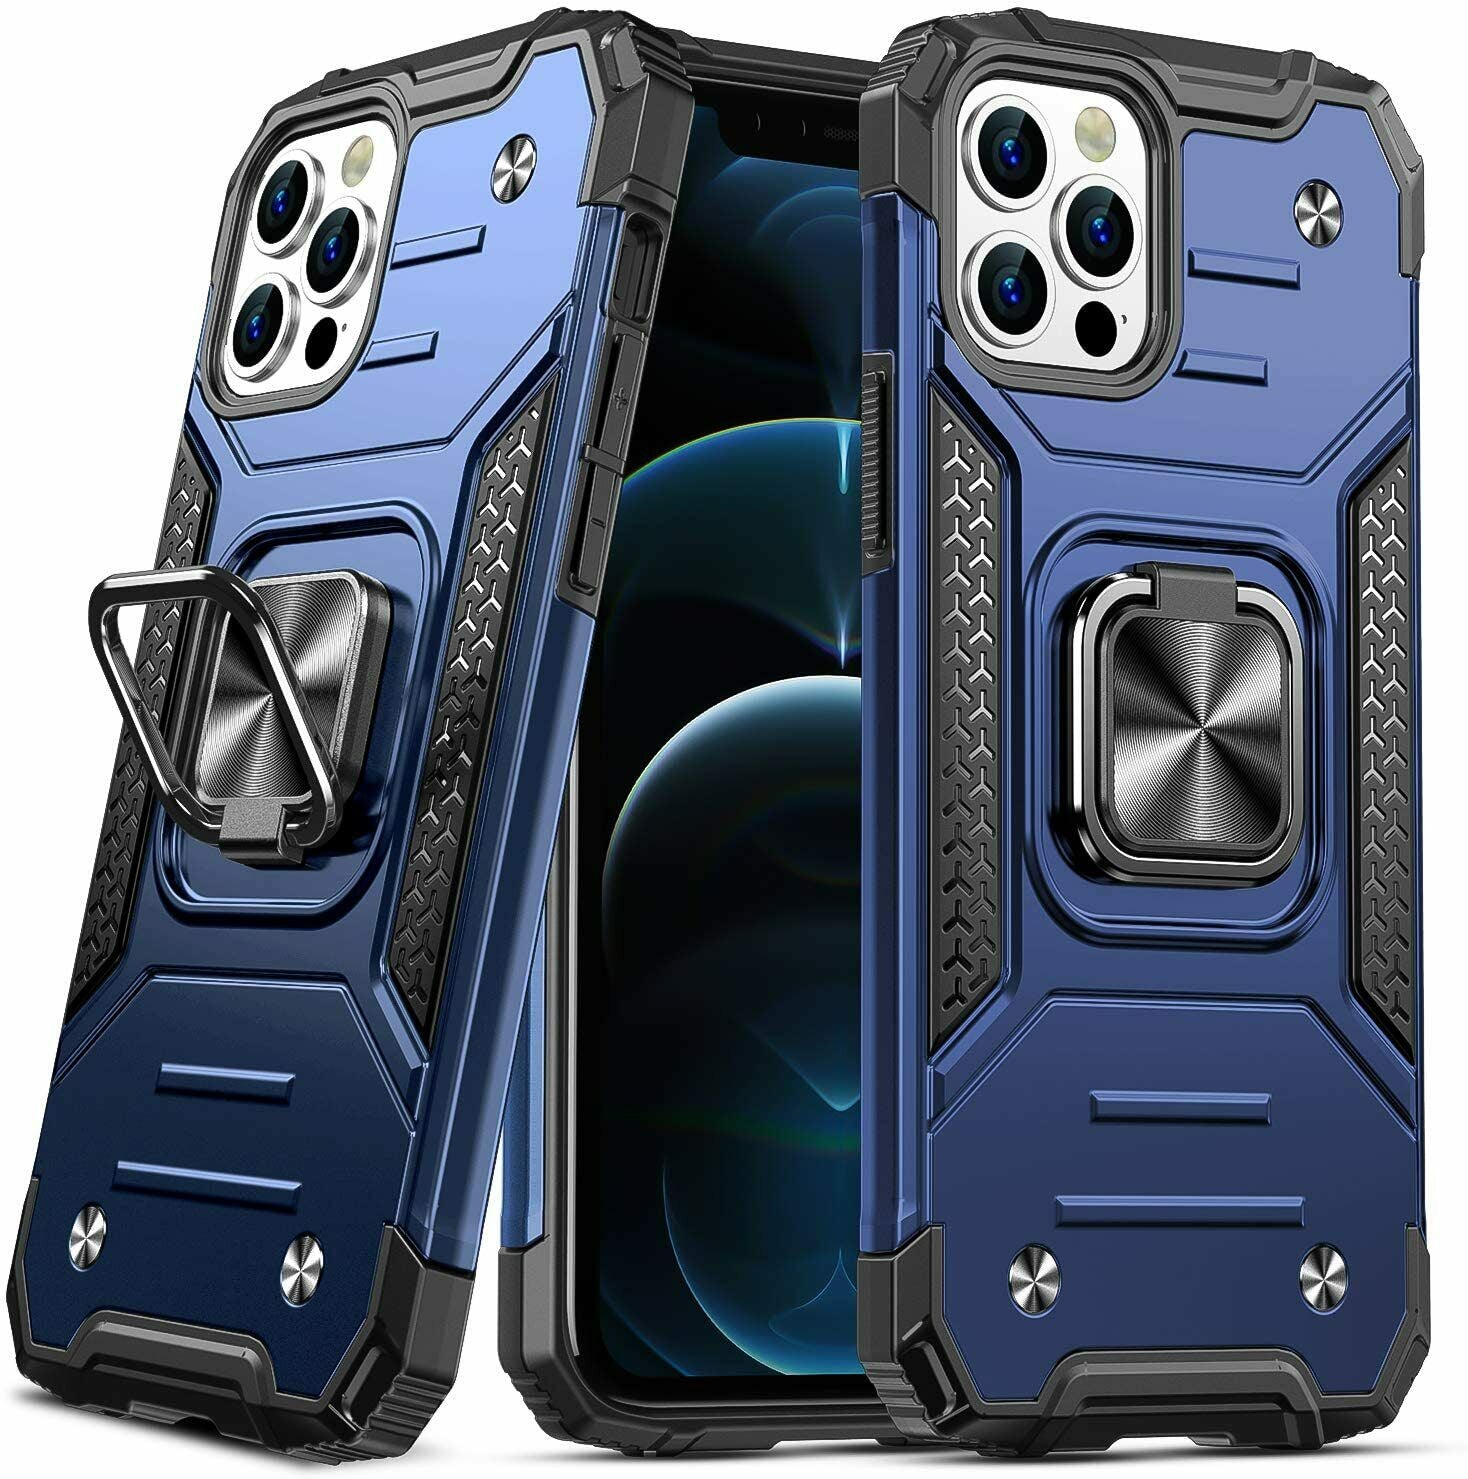 Case For iPhone 13 Pro Max Shockproof Rugged Blue Cover